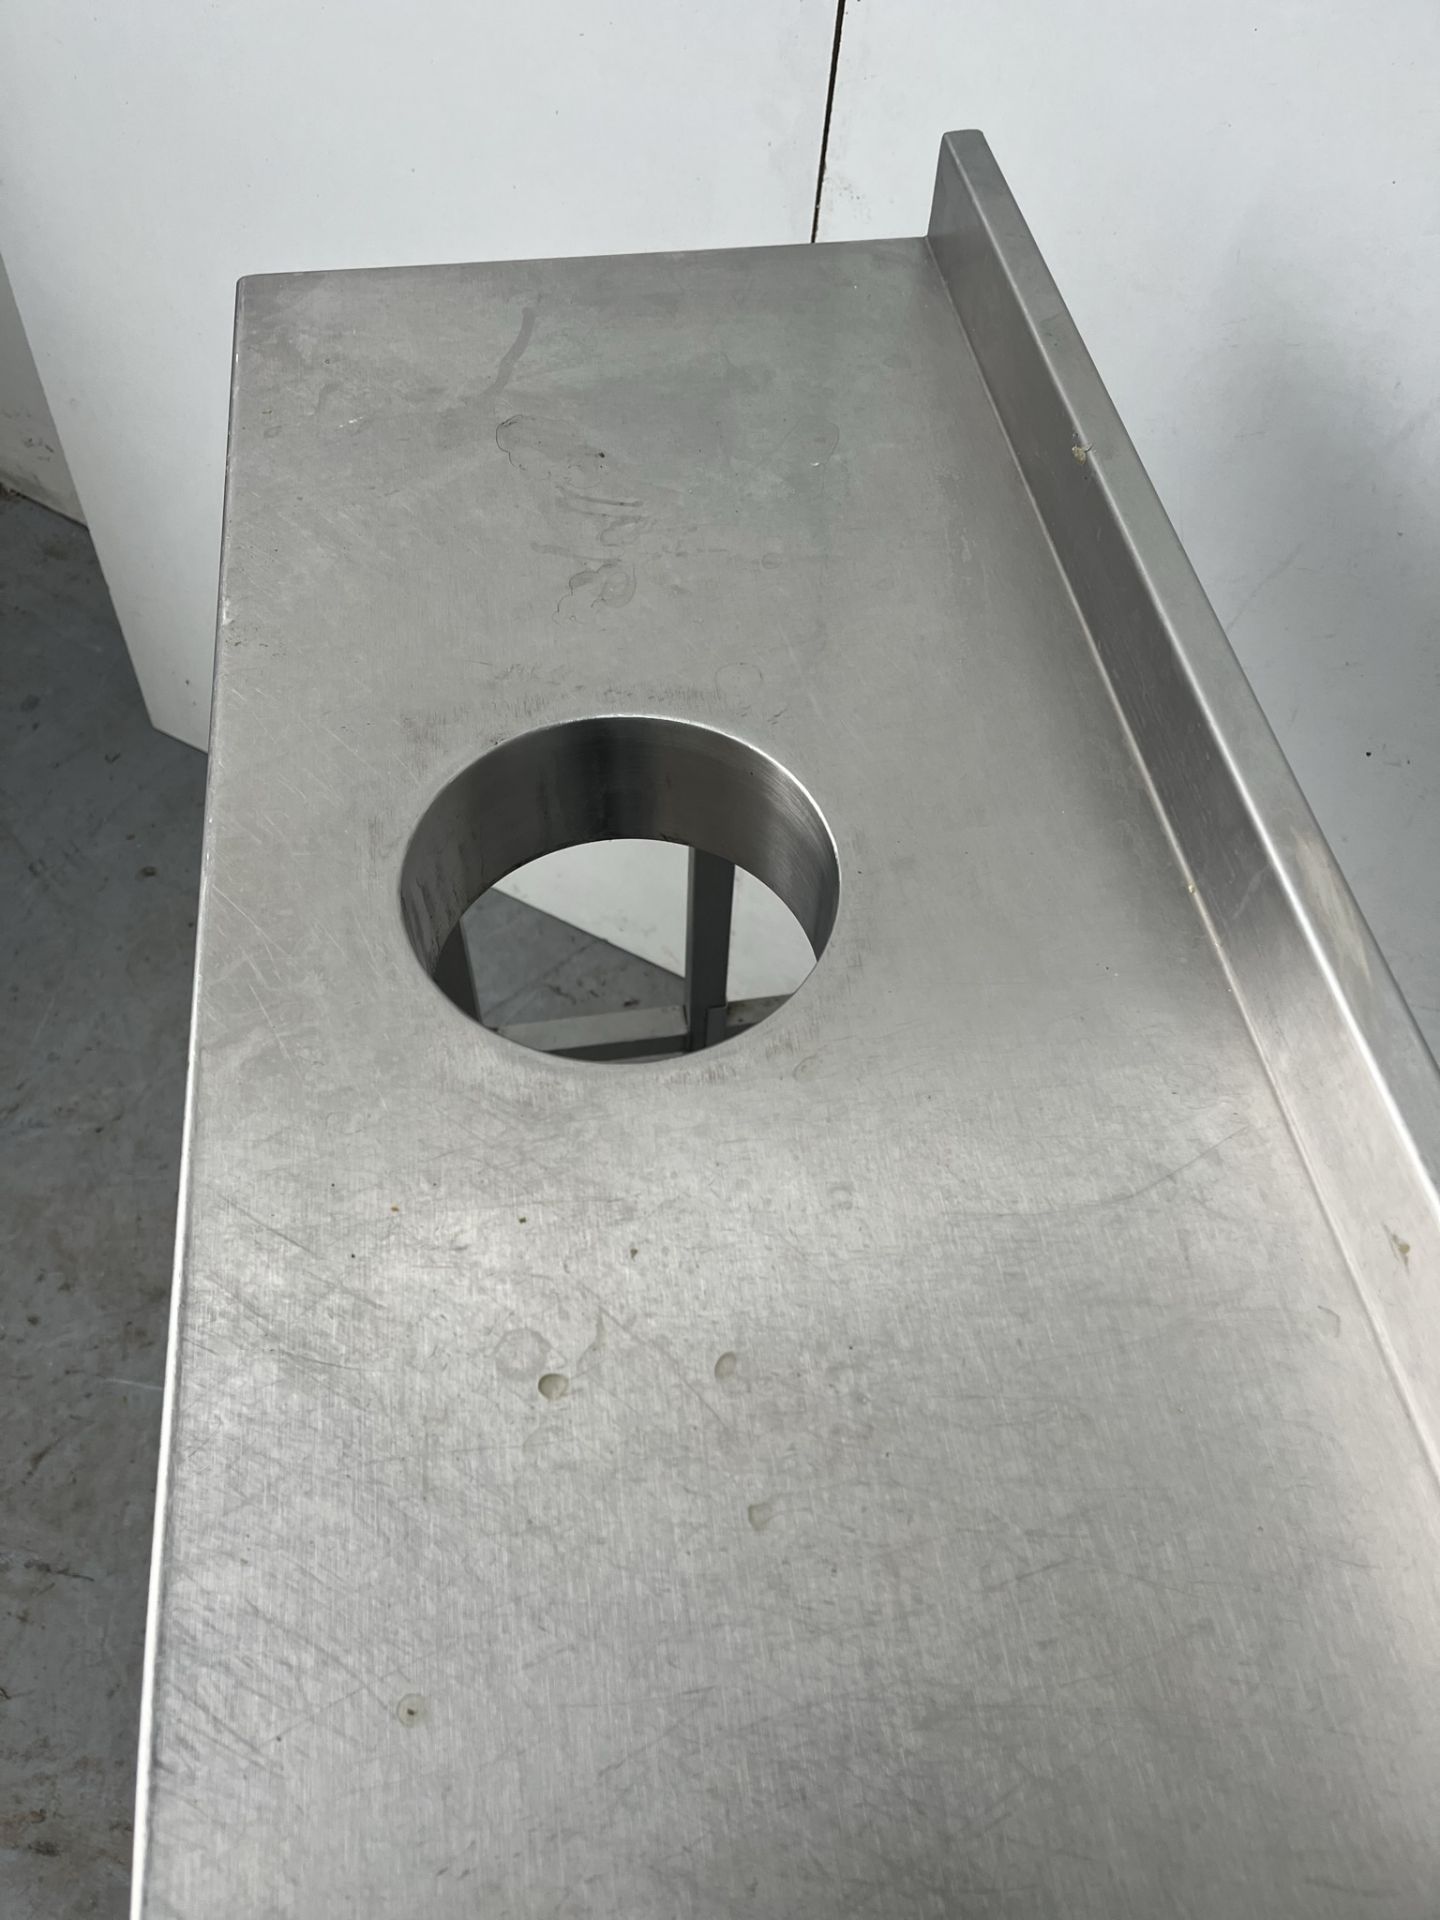 850mm Stainless Steel Catering Preperation Table With Waste Disposal Hole - Image 6 of 7